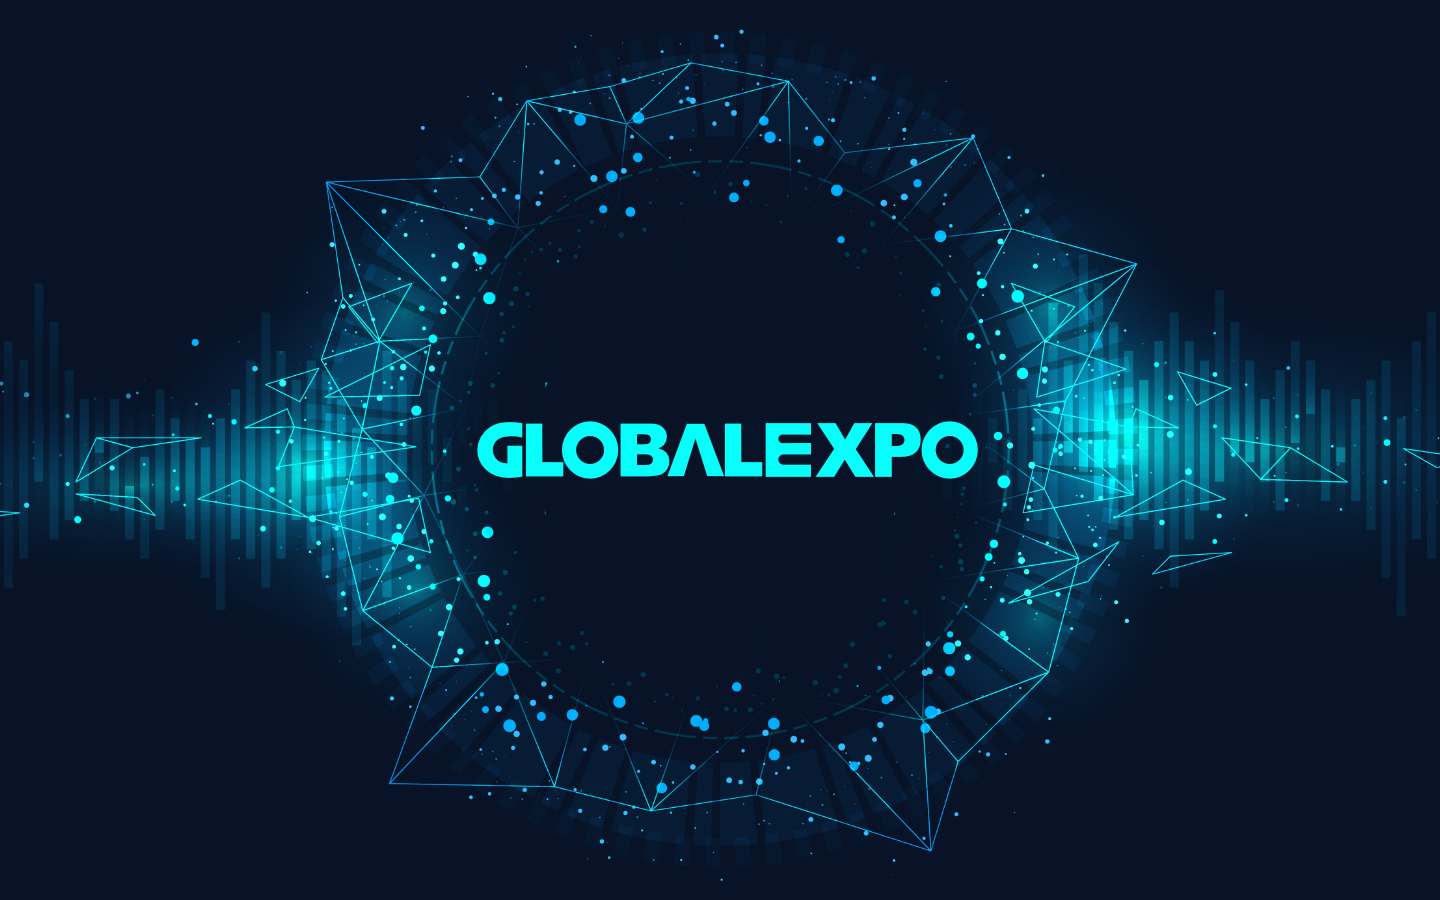 What do WWW and GLOBALEXPO have in common?